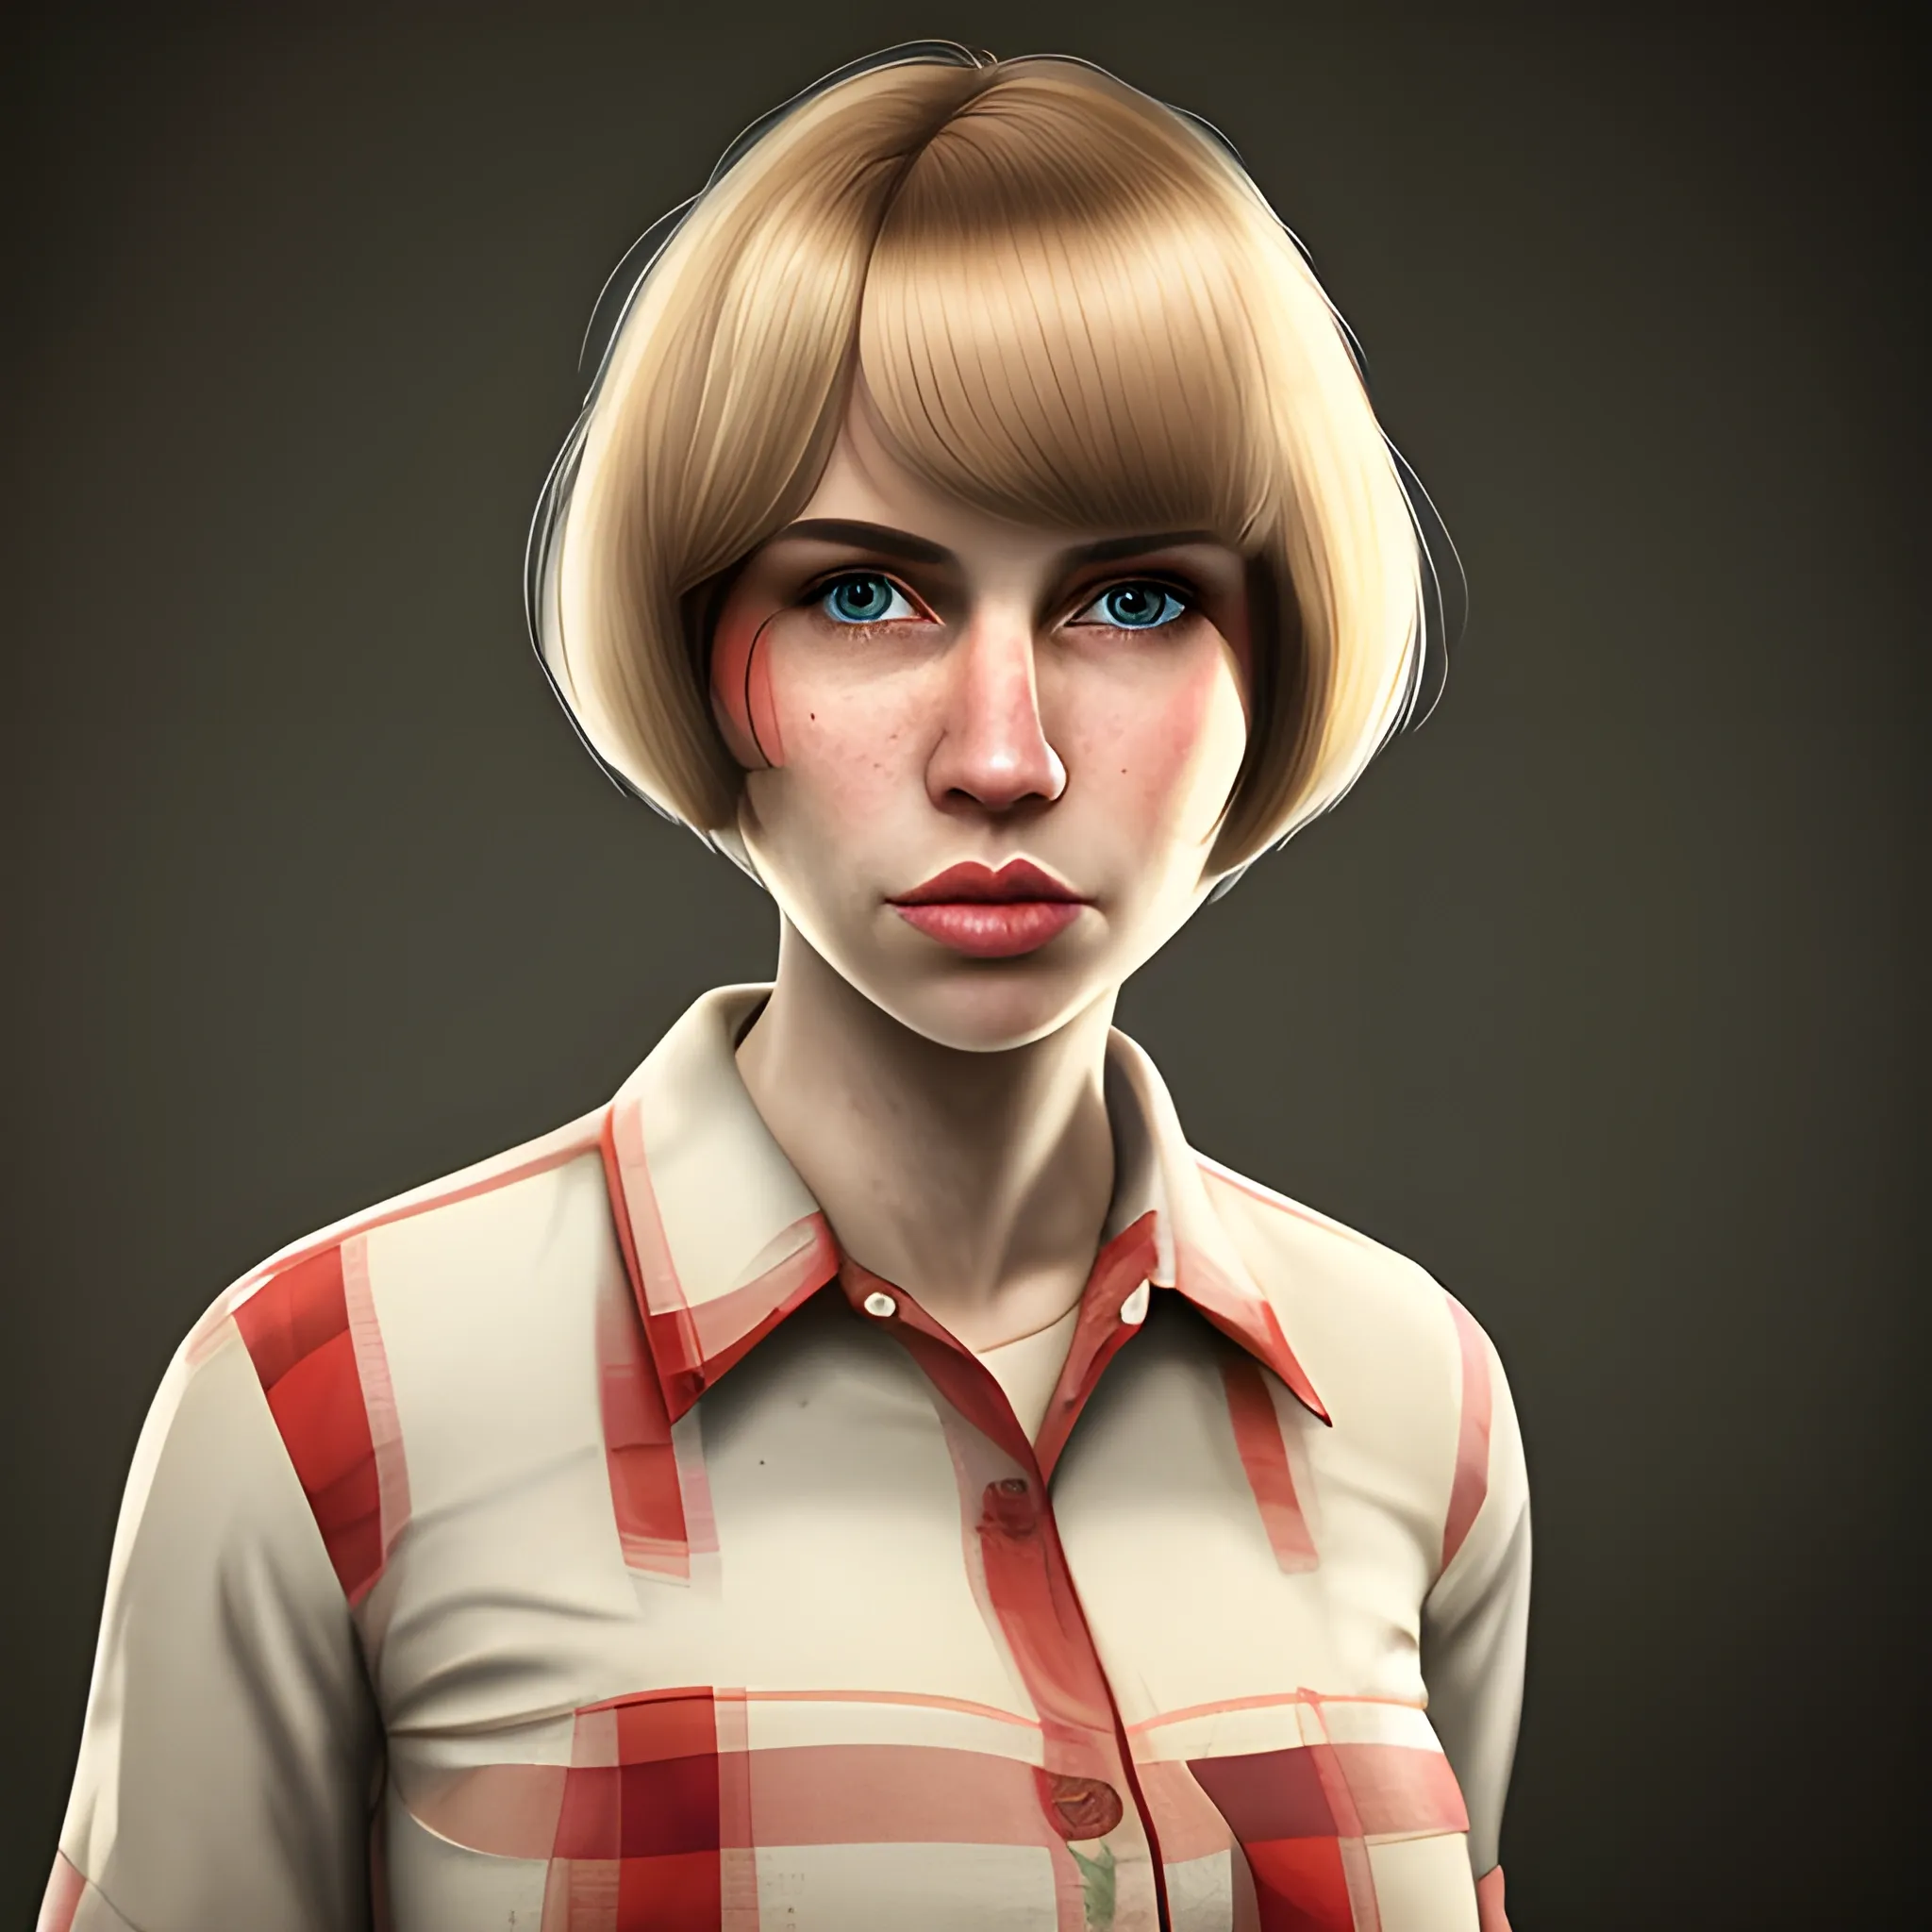 In the style of fallout 1, (masterpiece), (portrait photography), (portrait of an adult Caucasian female), no makeup, flat chested, white sports bra, unbuttoned red flannel shirt, bob-cut hairstyle, blond hair, brown eyes, full lips, round face, round nose